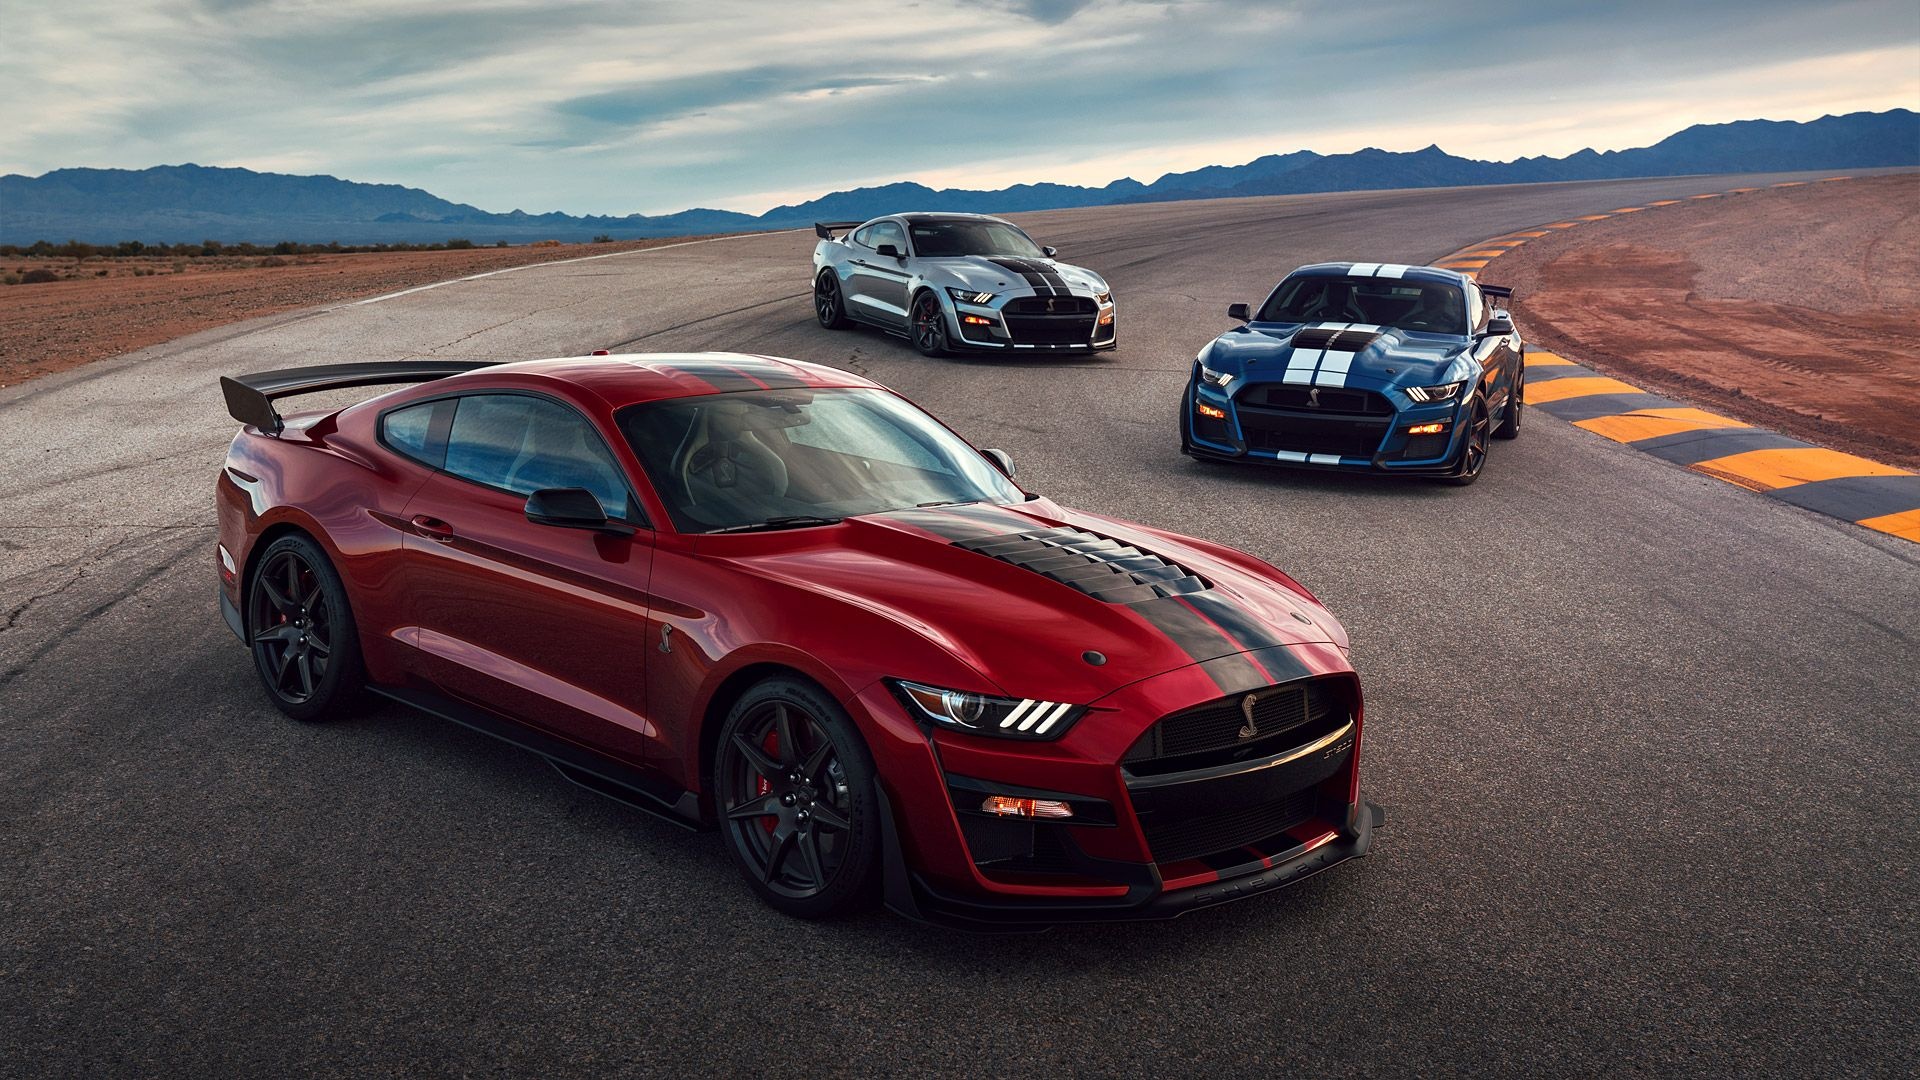 Ford Mustang Shelby, High-performance beast, Striking wallpapers, Collector's choice, 1920x1080 Full HD Desktop